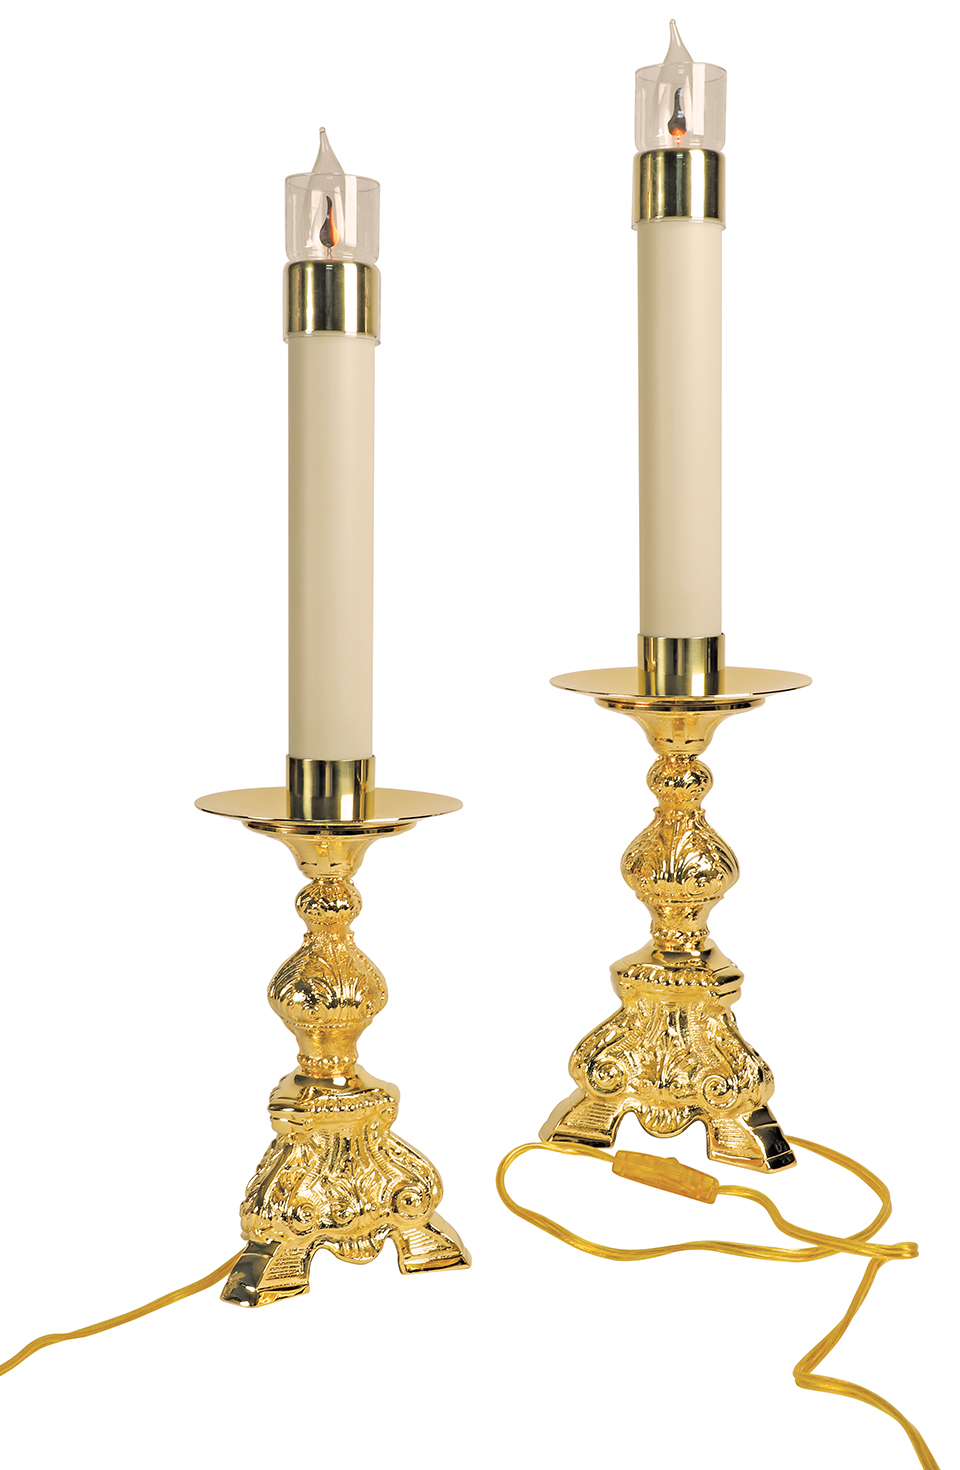 Altar Candlestick 10 3/4 inch 24K Gold Plate Electric